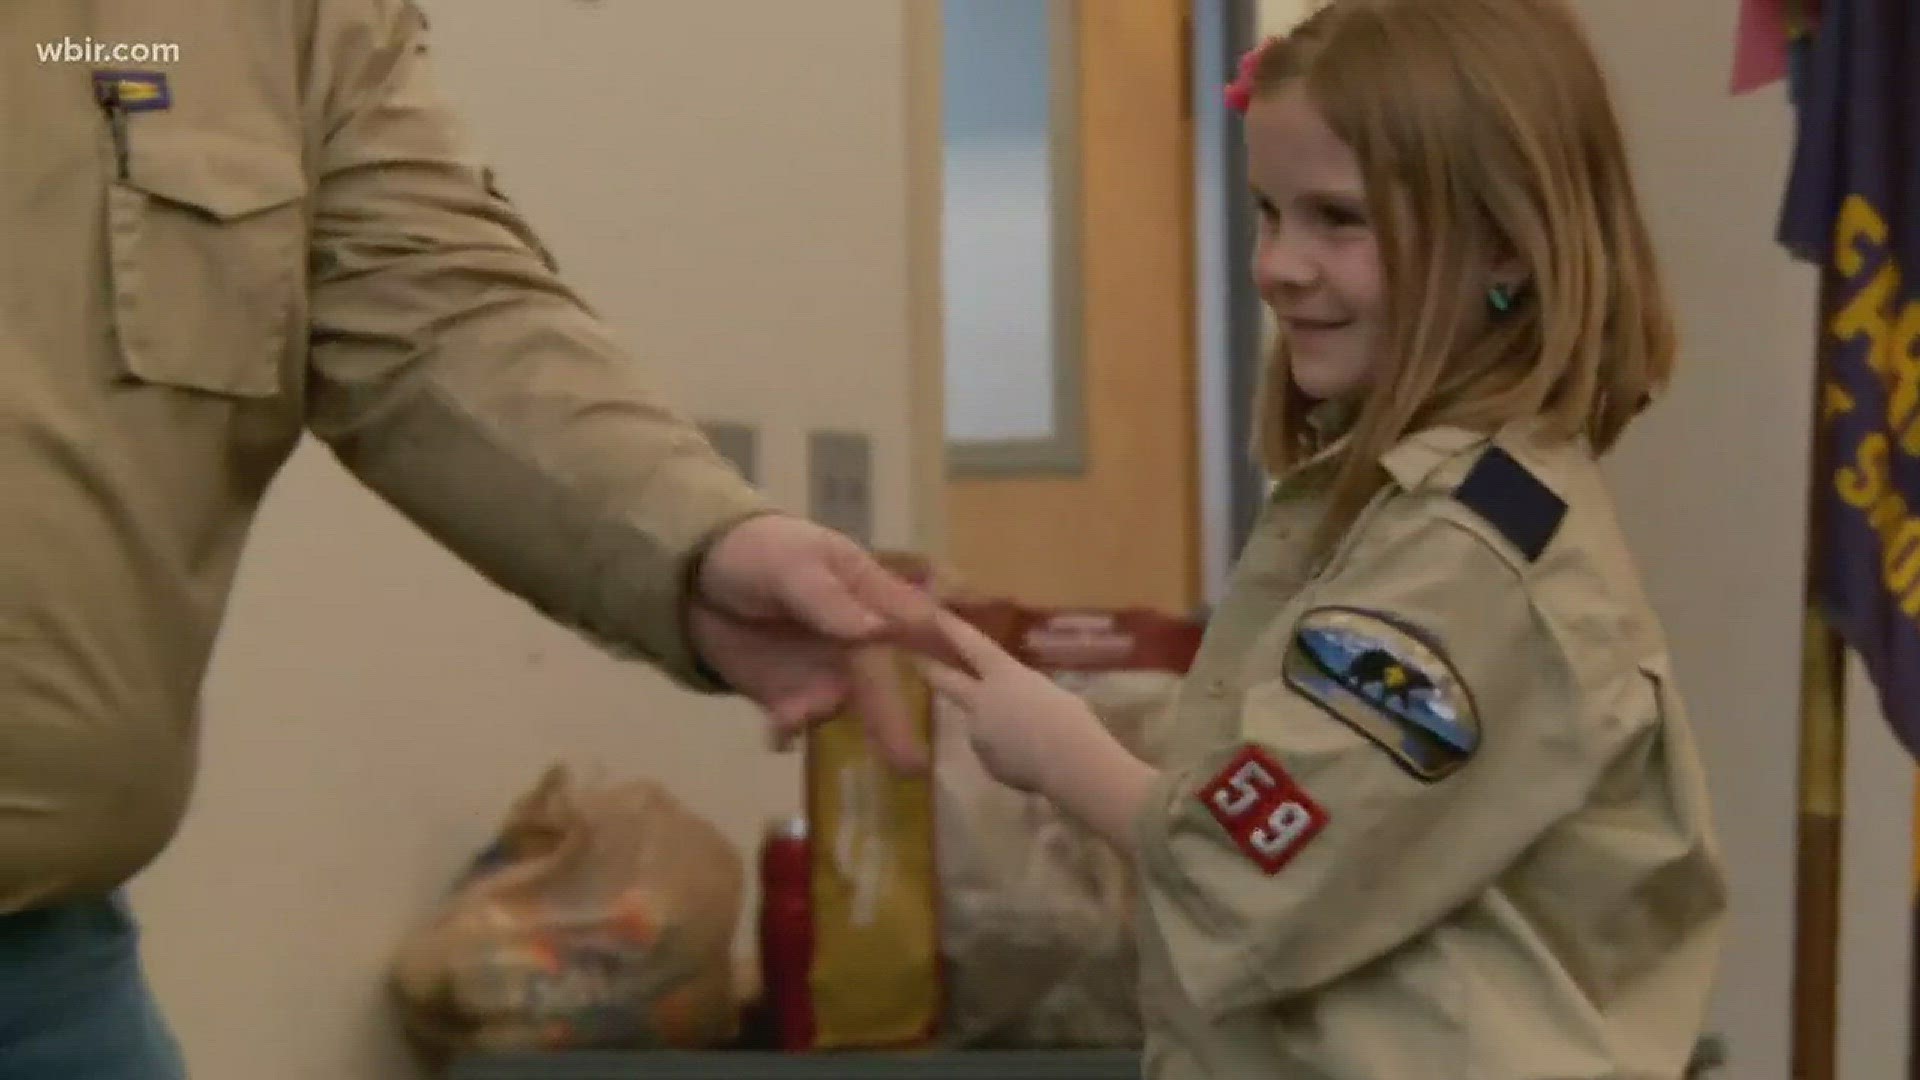 March 19, 2018: After 108 years, a pack of Boy Scouts in Farragut, Tennessee, is among the first in the country to recognize girls in the program.